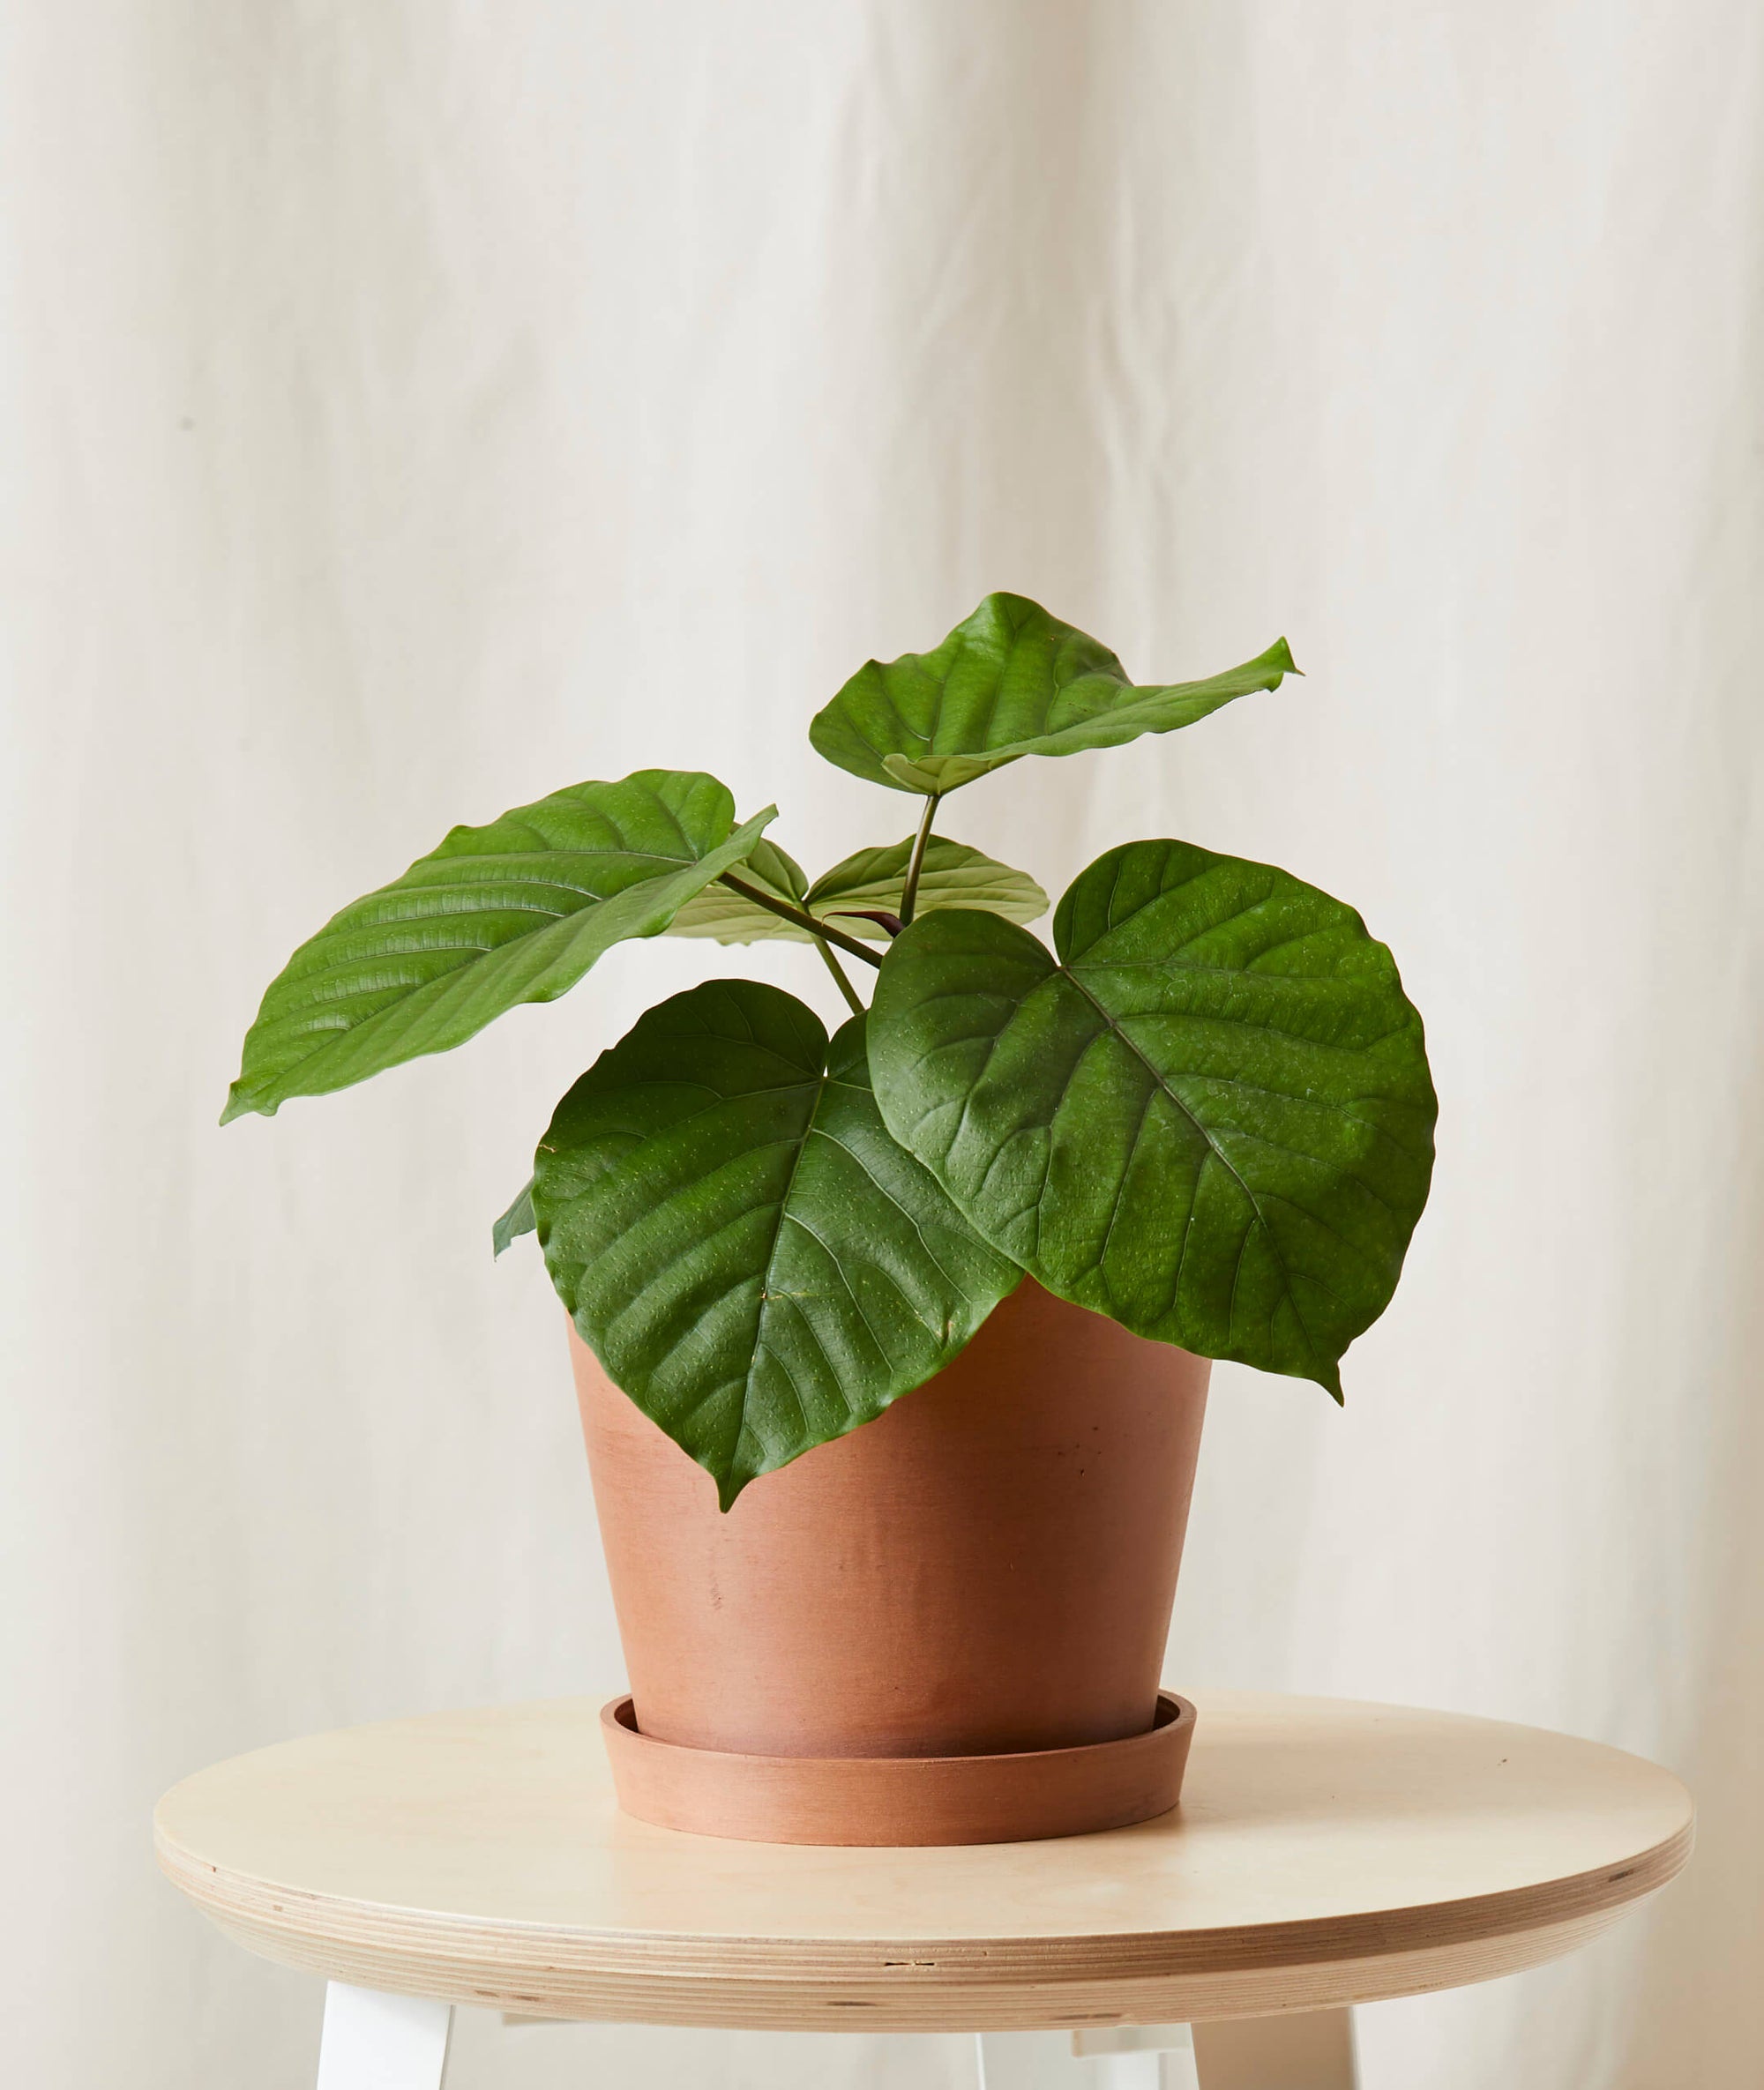 Potted plant with broad, heart shaped, deep green leaves